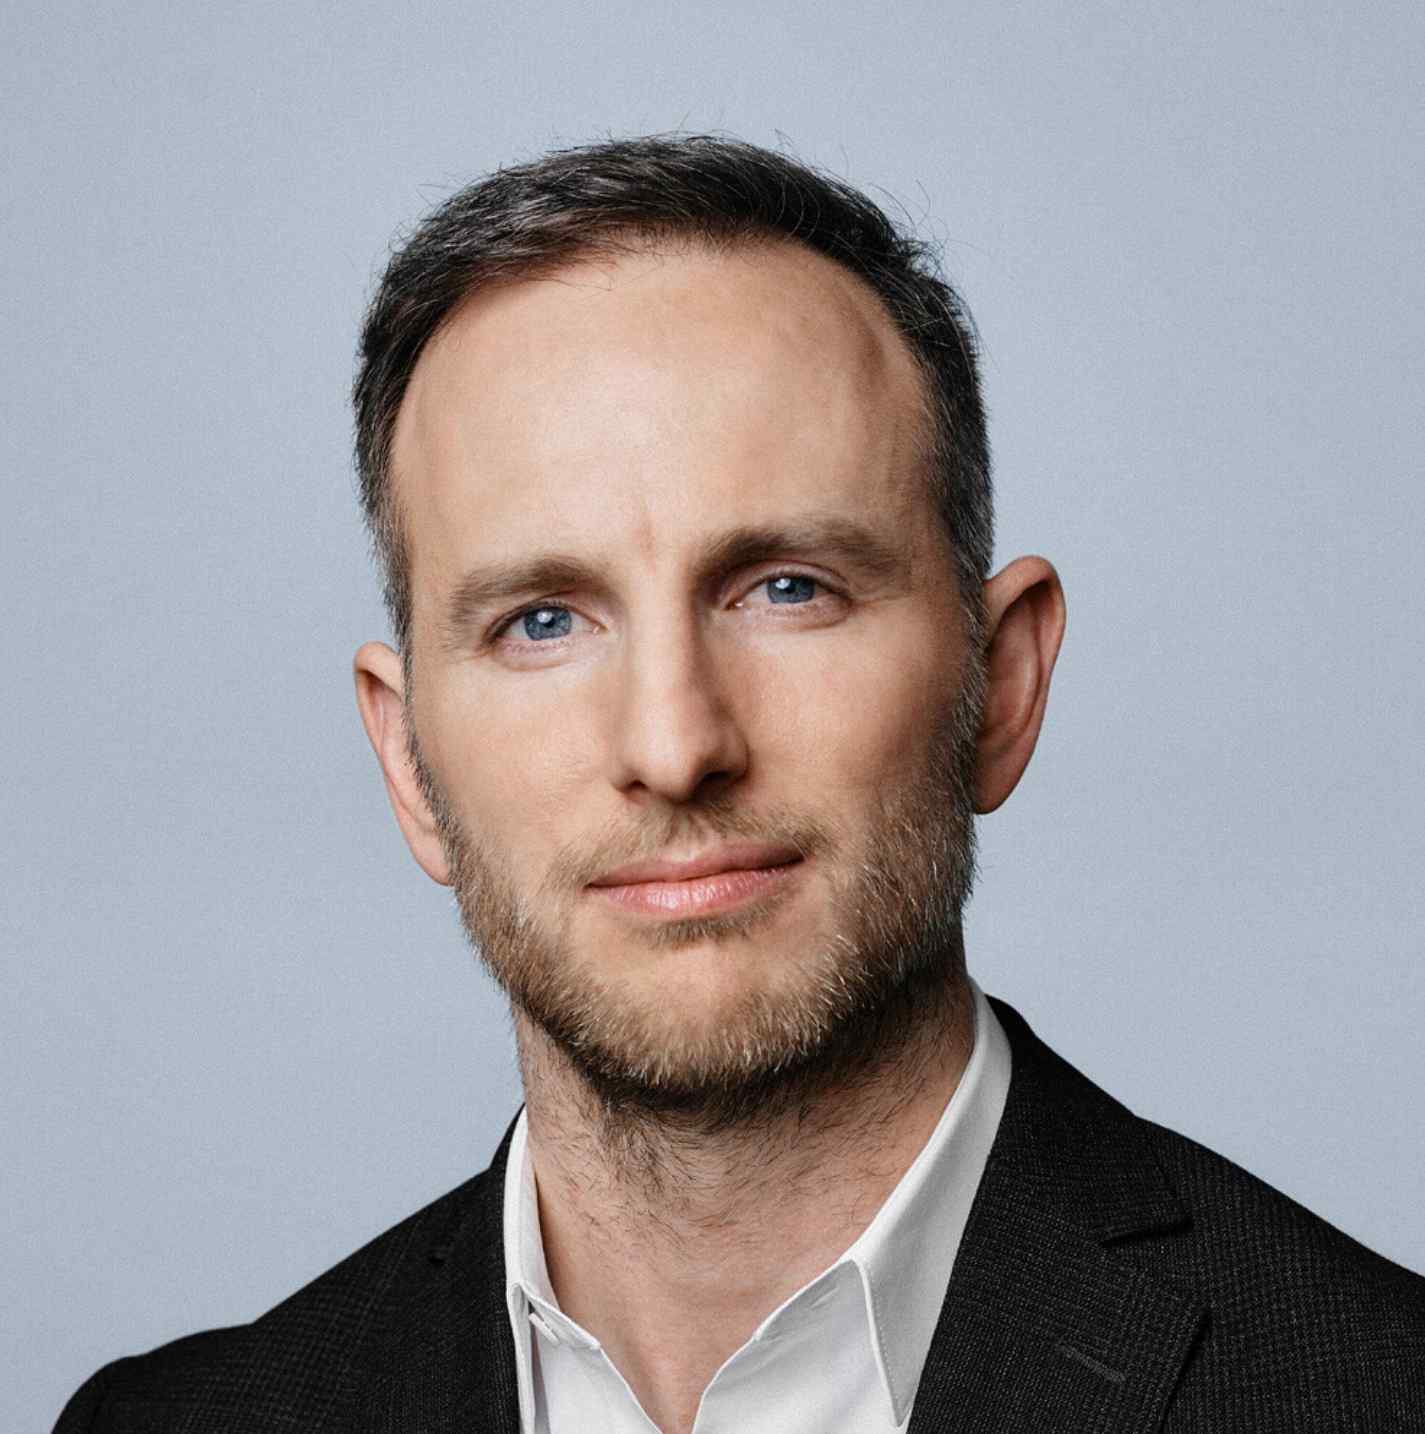 Joe Gebbia, Designer and Co-Founder of Airbnb